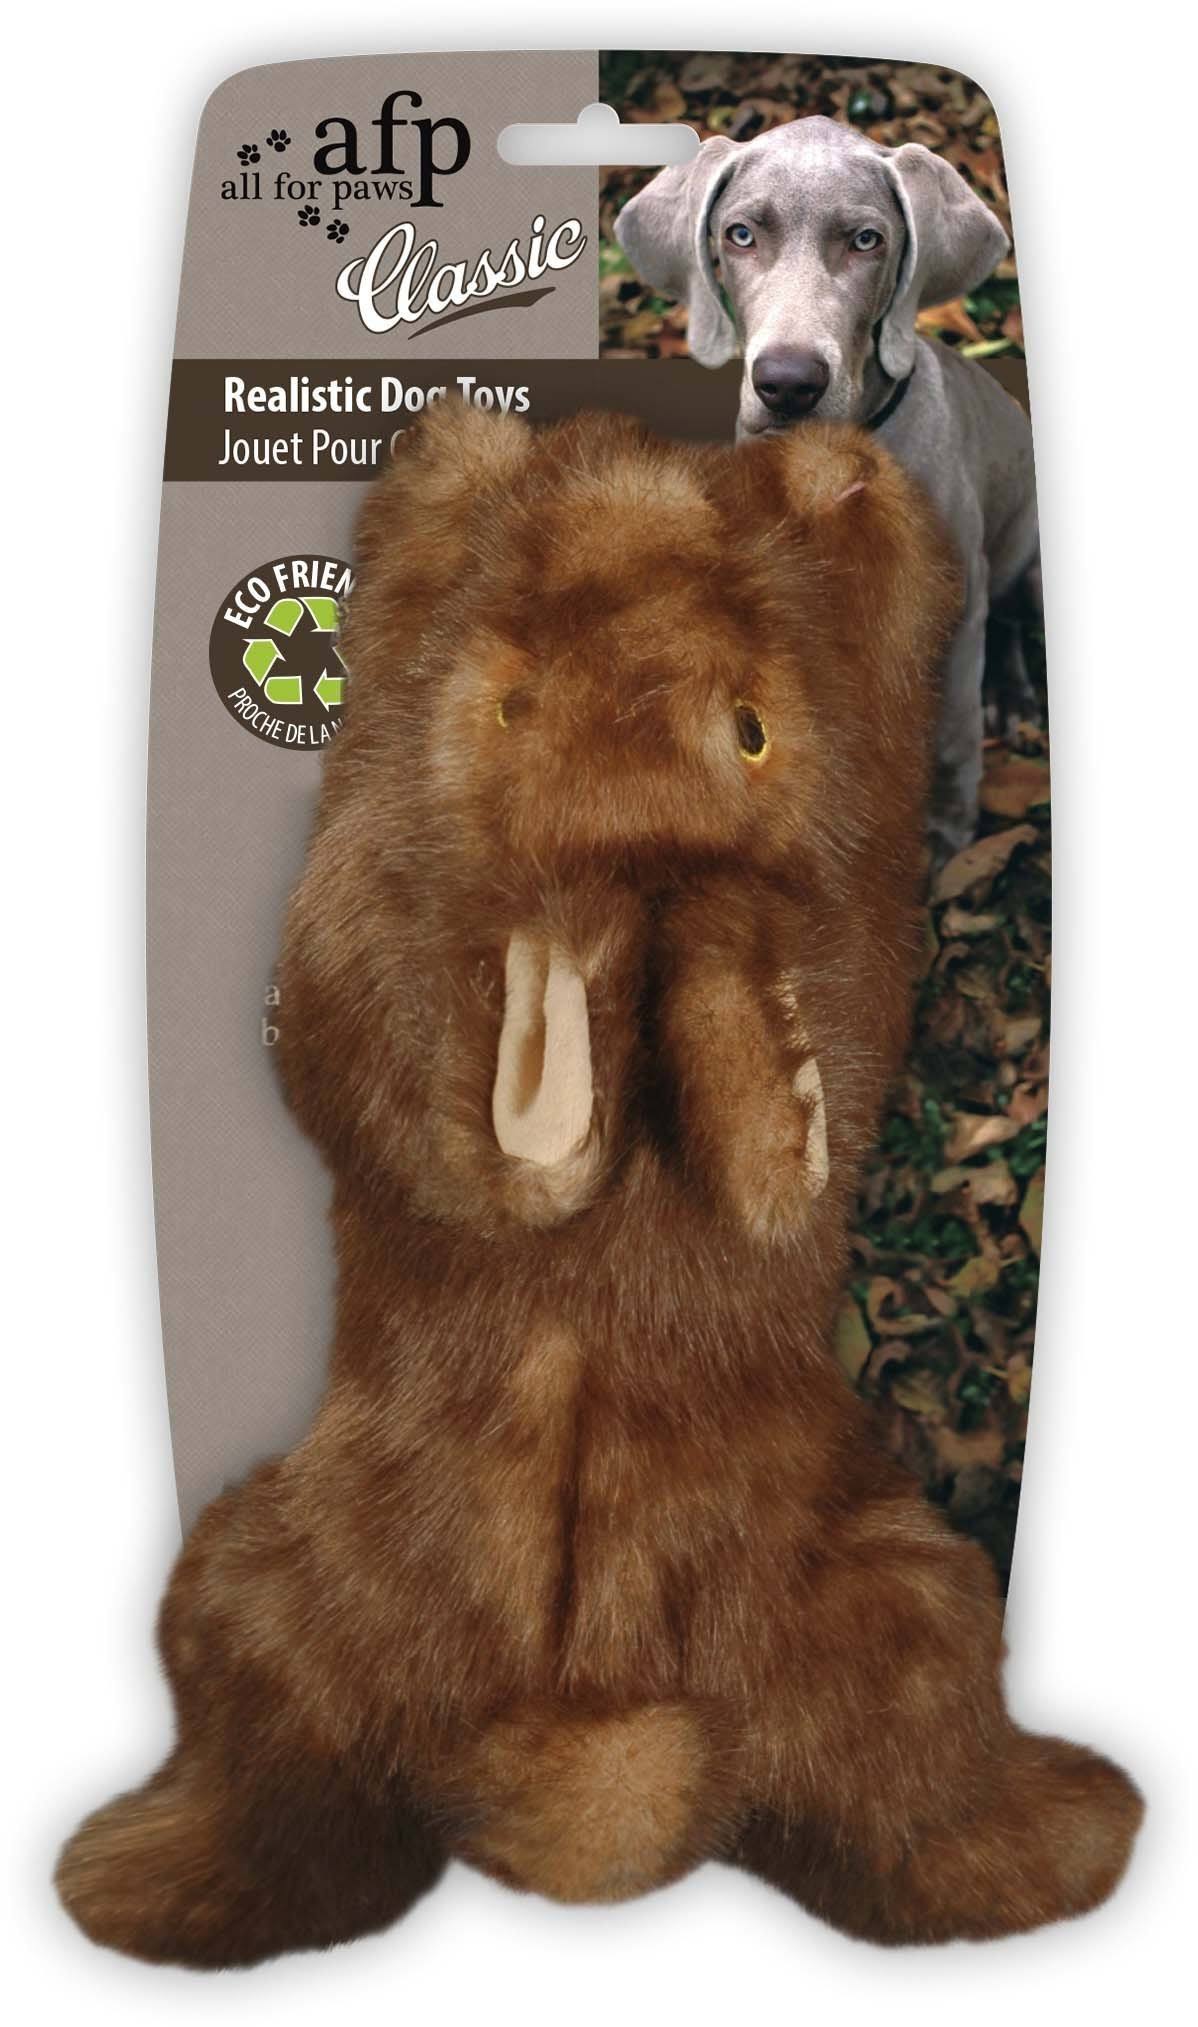 All for Paws Rabbit Pet Toys - Small, Classic Brown